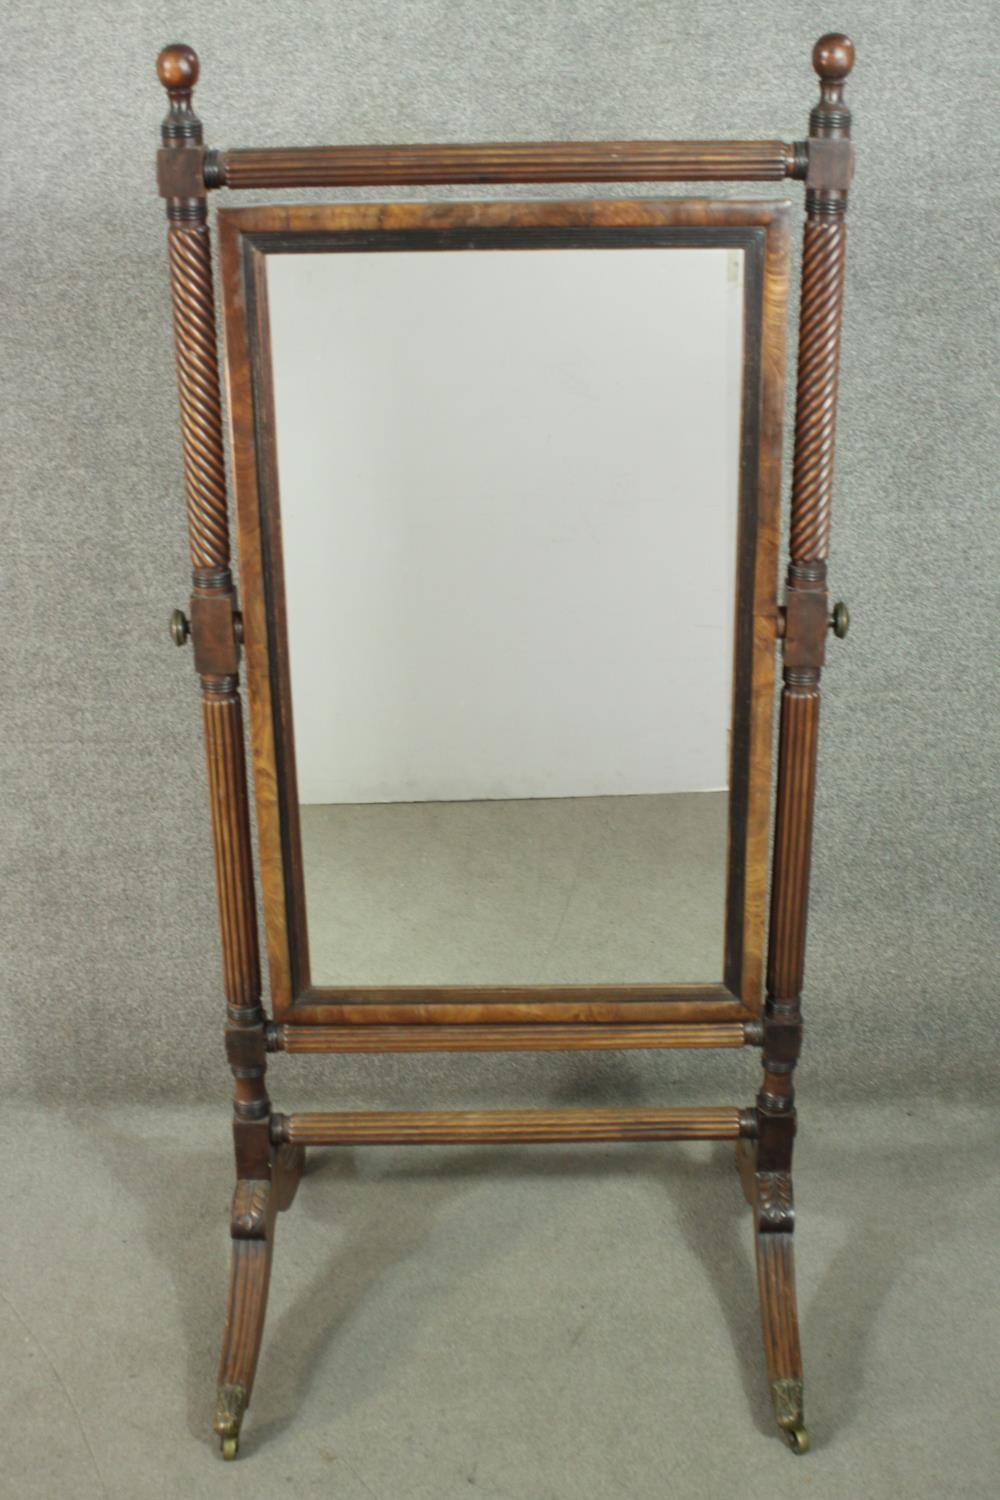 A George III mahogany cheval mirror, with a wrythen and reeded frame, set with a modern mirror